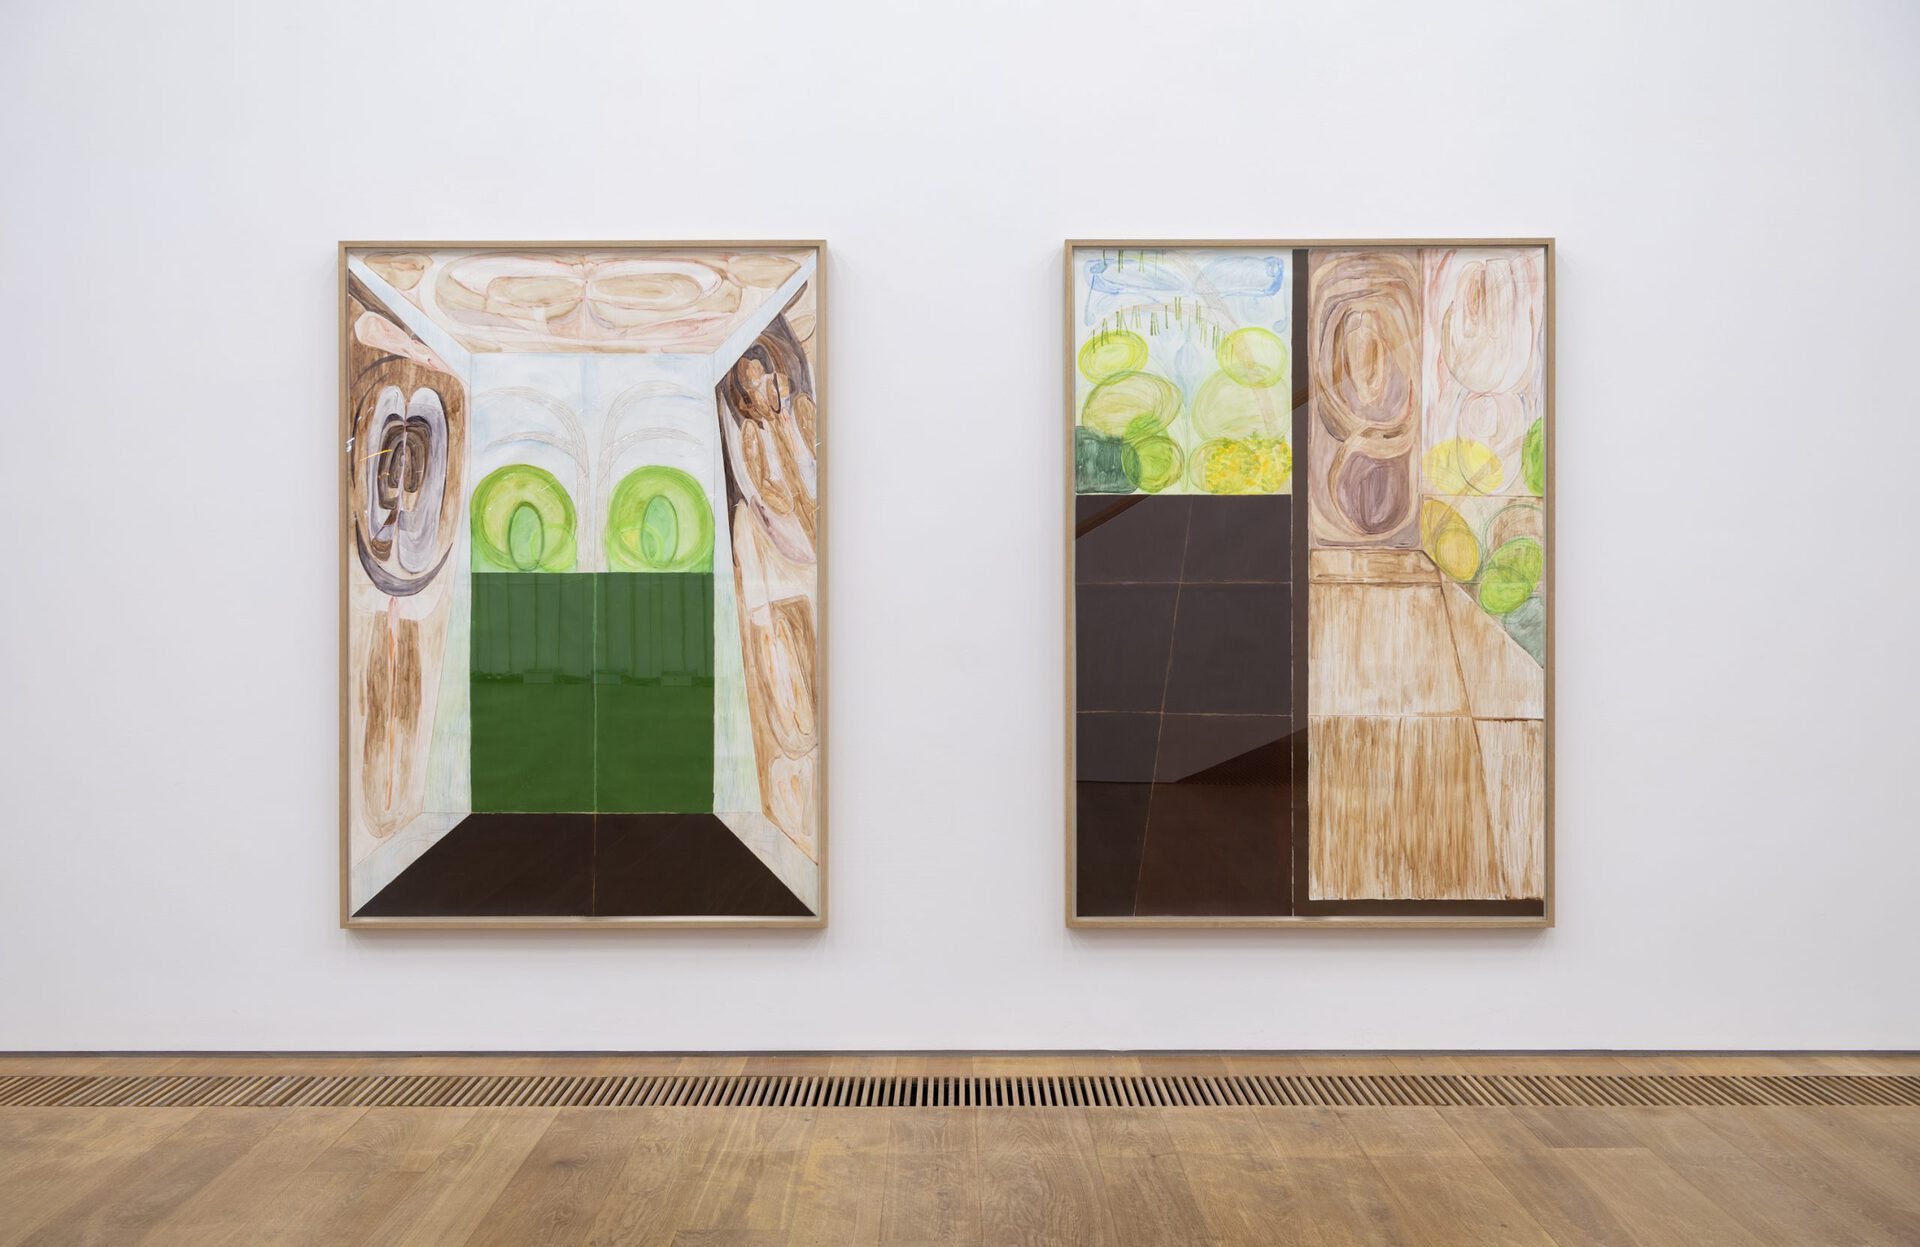 Johanna Klingler, "Garden View I" (Installation view), 2022, "Garden View II", 2022 Acrylic paint, watercolor and  crayon on stone paper in  artist’s frame